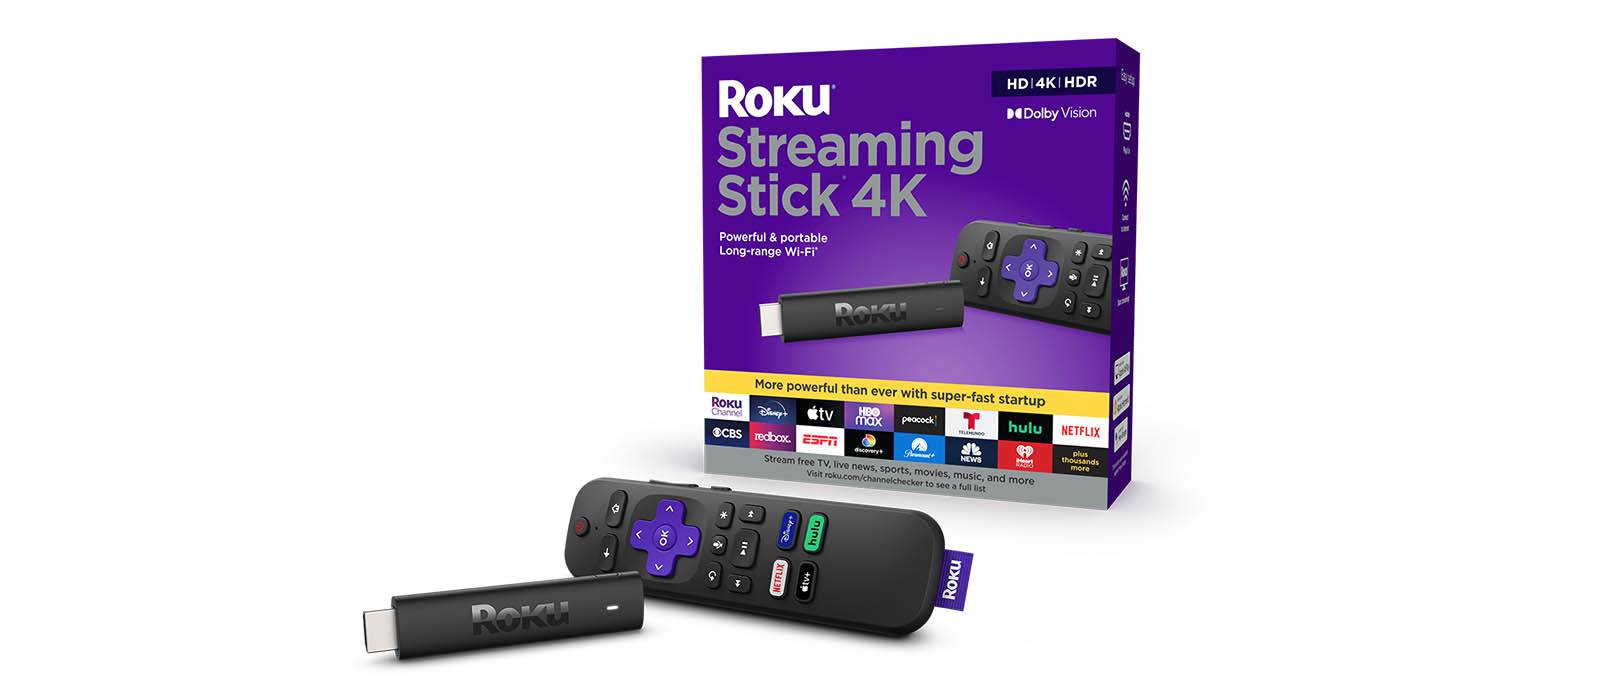 Deal Alert! The Roku Stick 4K is On Sale For Just $39.55